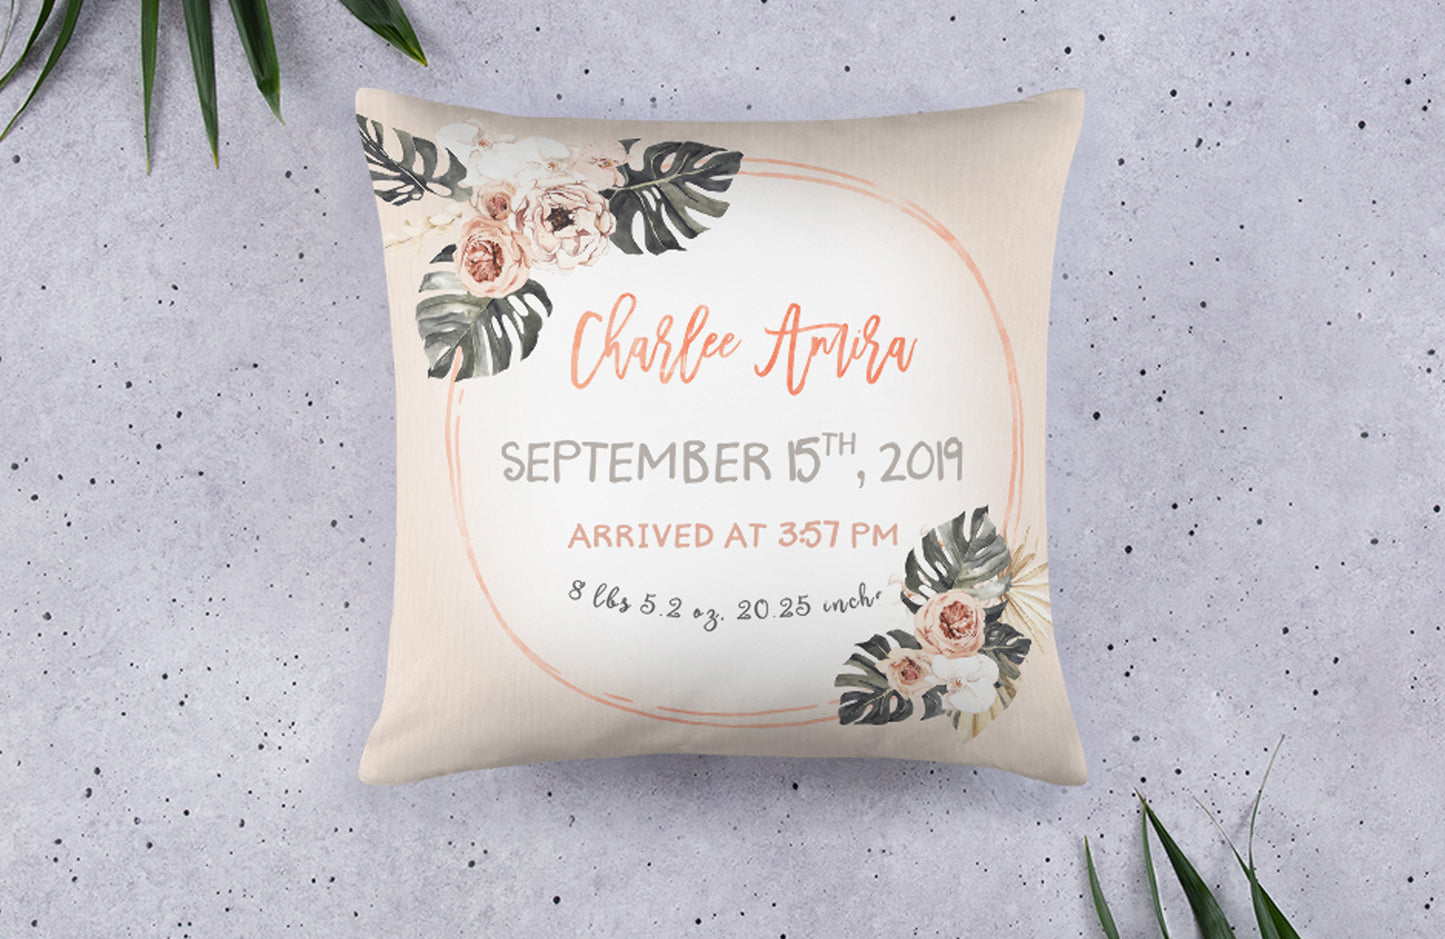 Modern tropics themed birth announcement pillow that says the baby's name, date and time of birth, weight, and length. It is orange and beige with flowers and leaves in the two opposite corners.